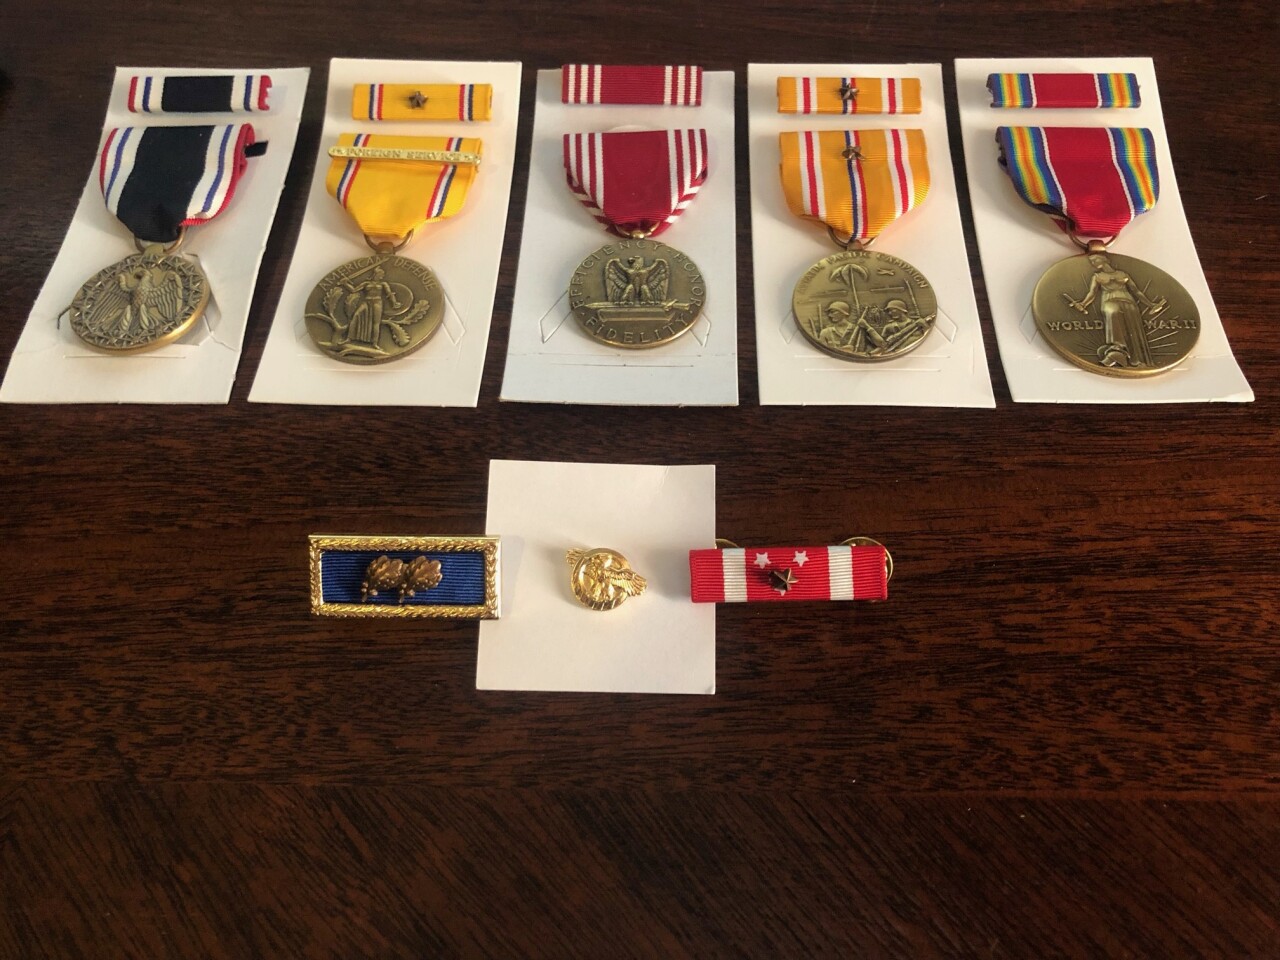 Some of Bennett's medals